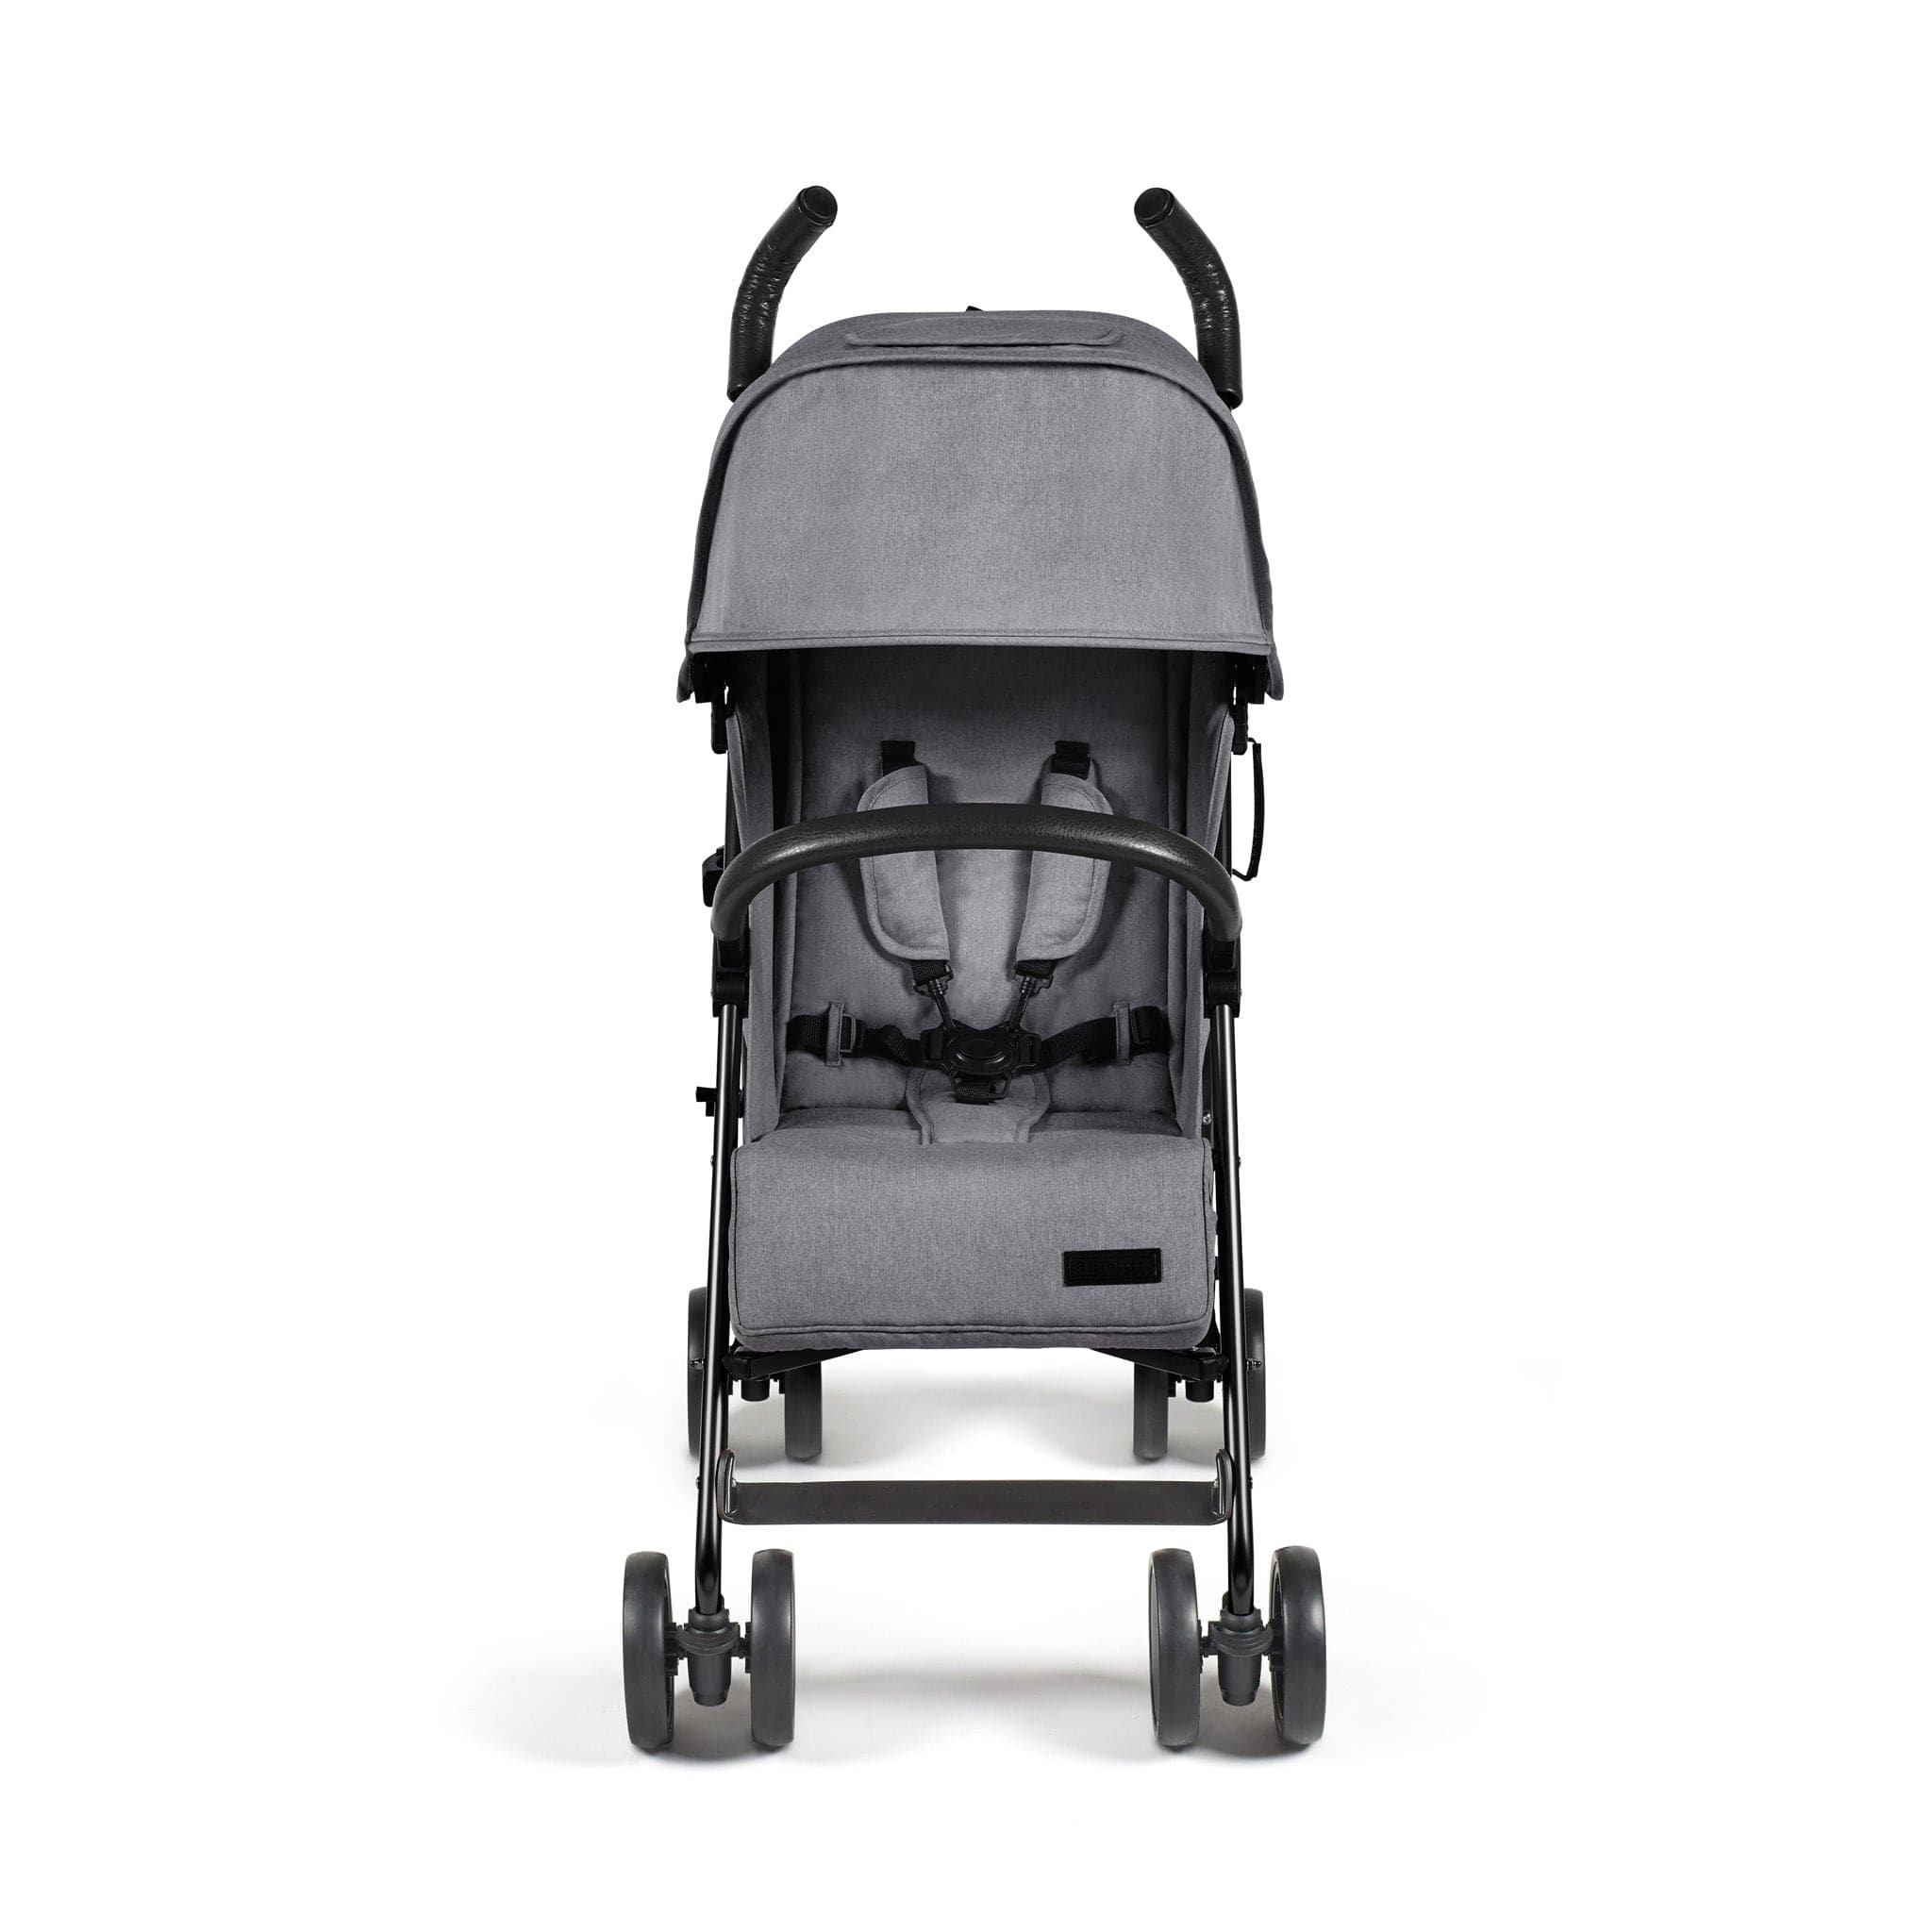 Ickle Bubba Discovery Prime Stroller Graphite Grey/Matt Black Pushchairs & Buggies 15-002-300-120 5056515020137